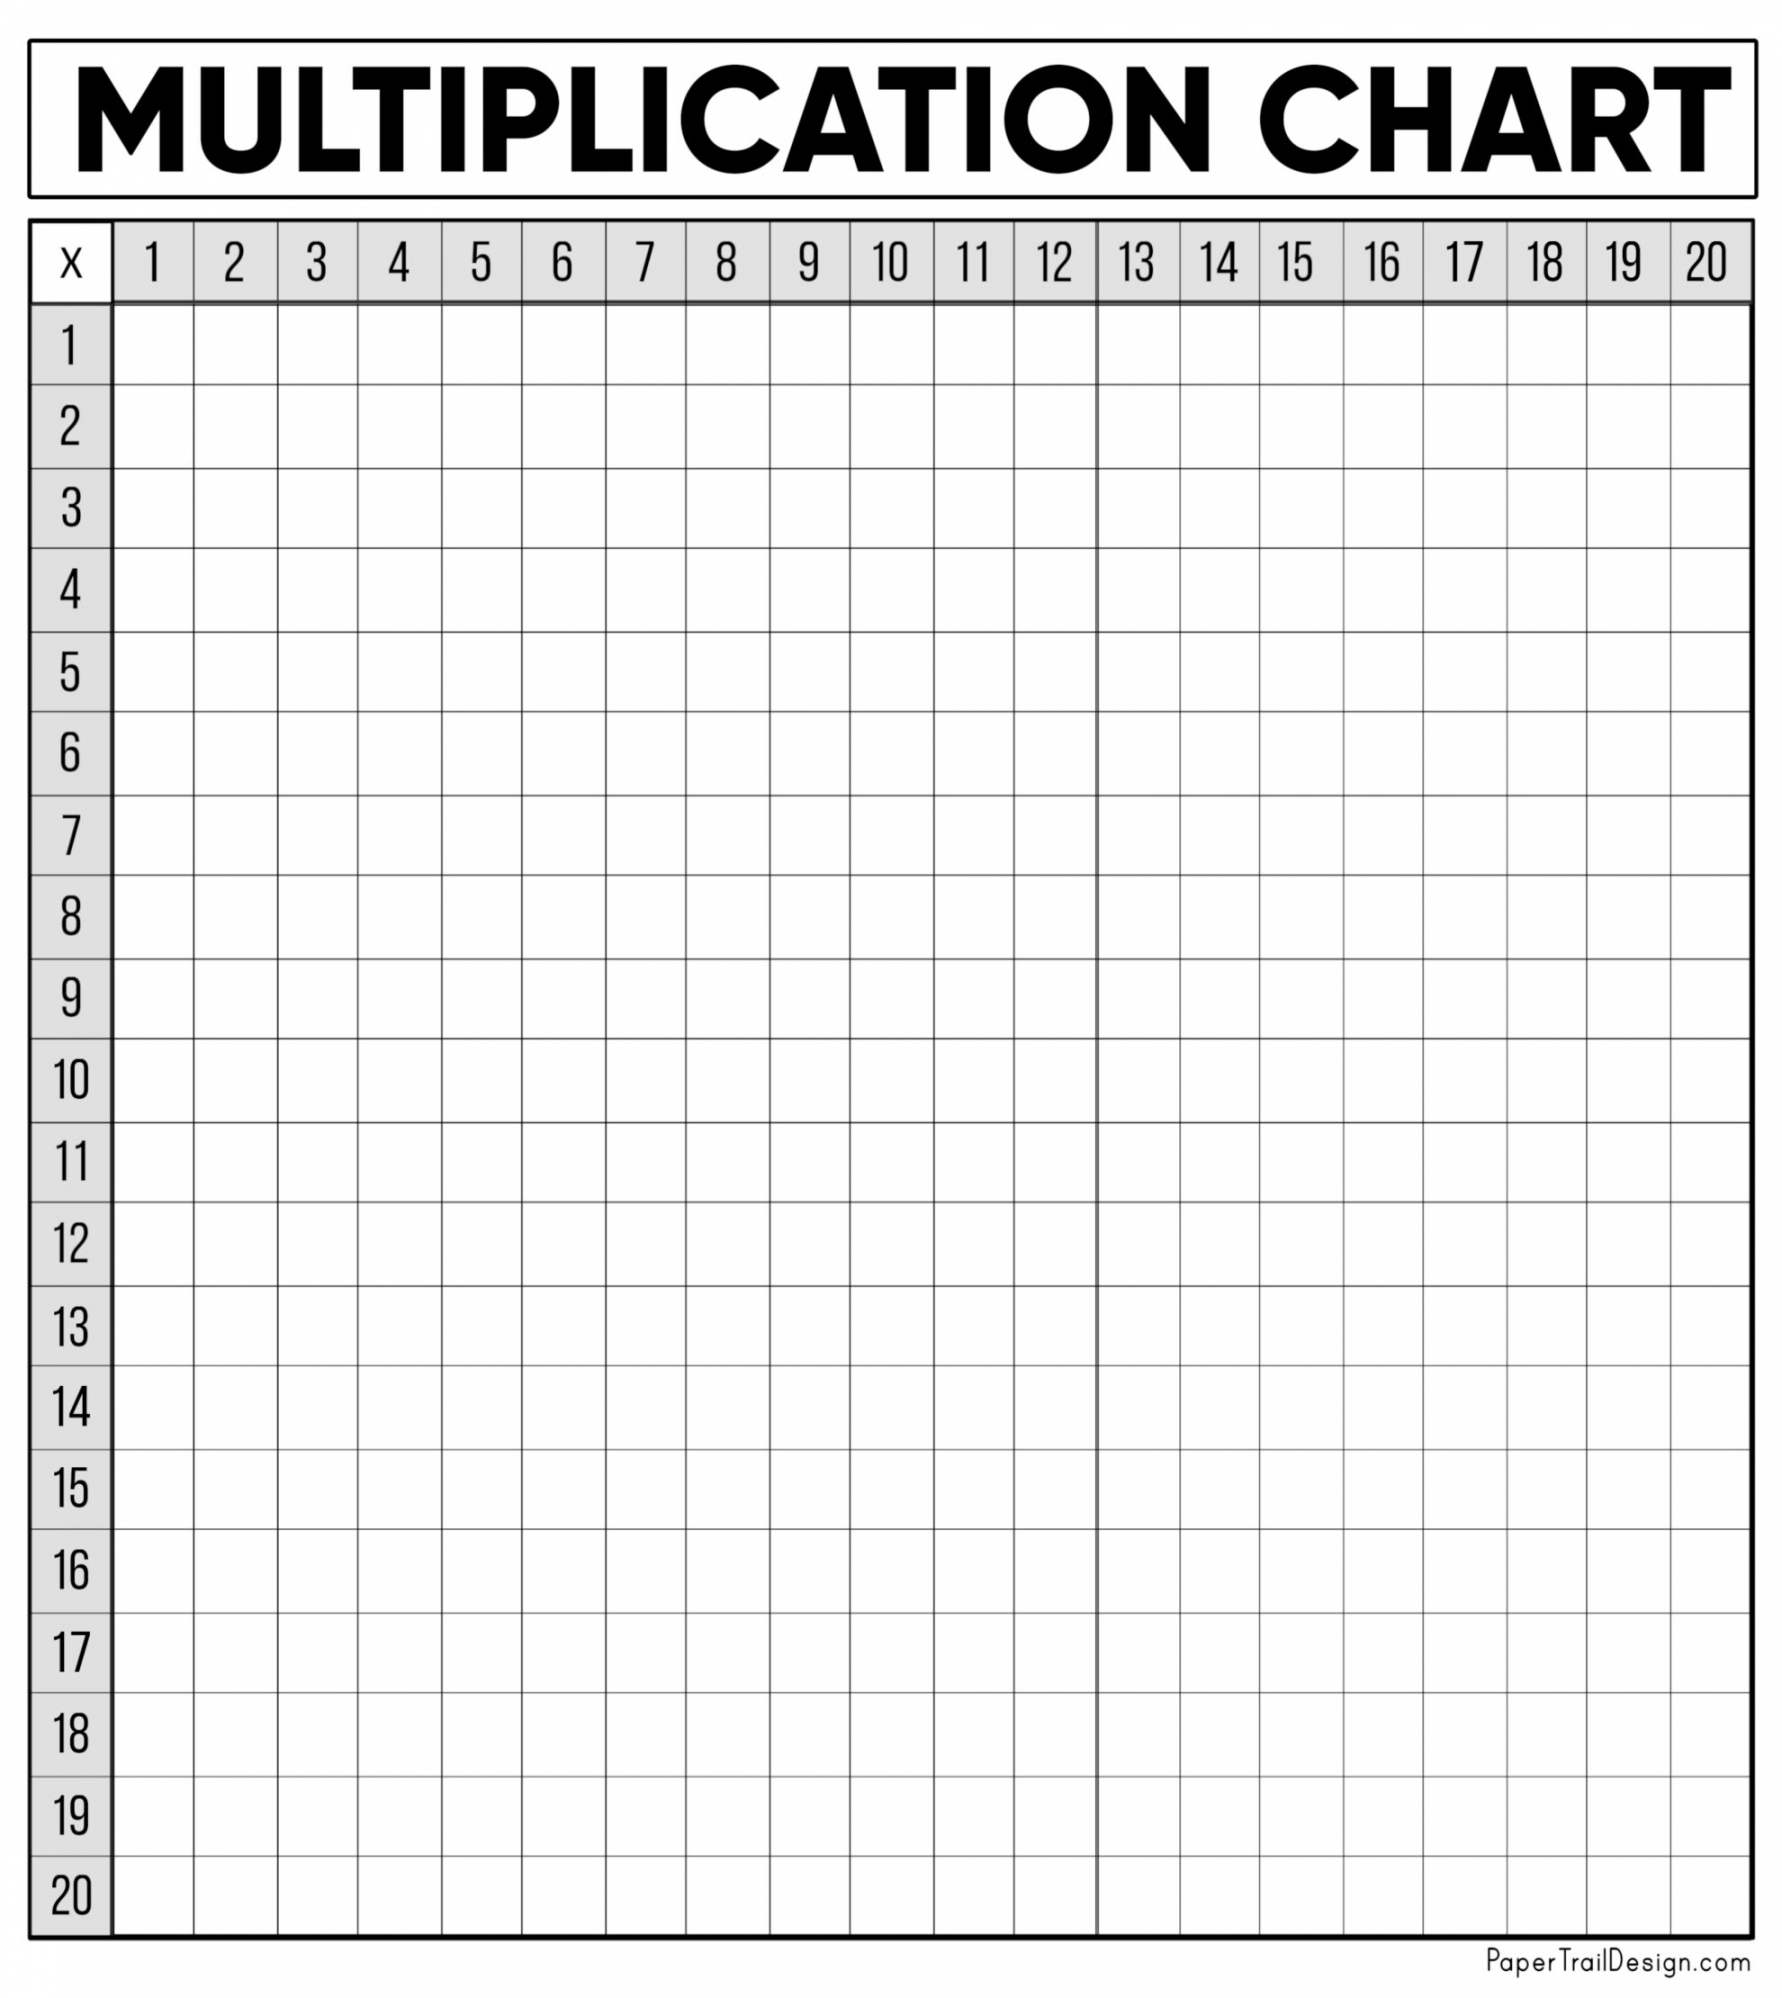 Free Multiplication Chart Printable - Paper Trail Design - FREE Printables - Times Table Blank Chart